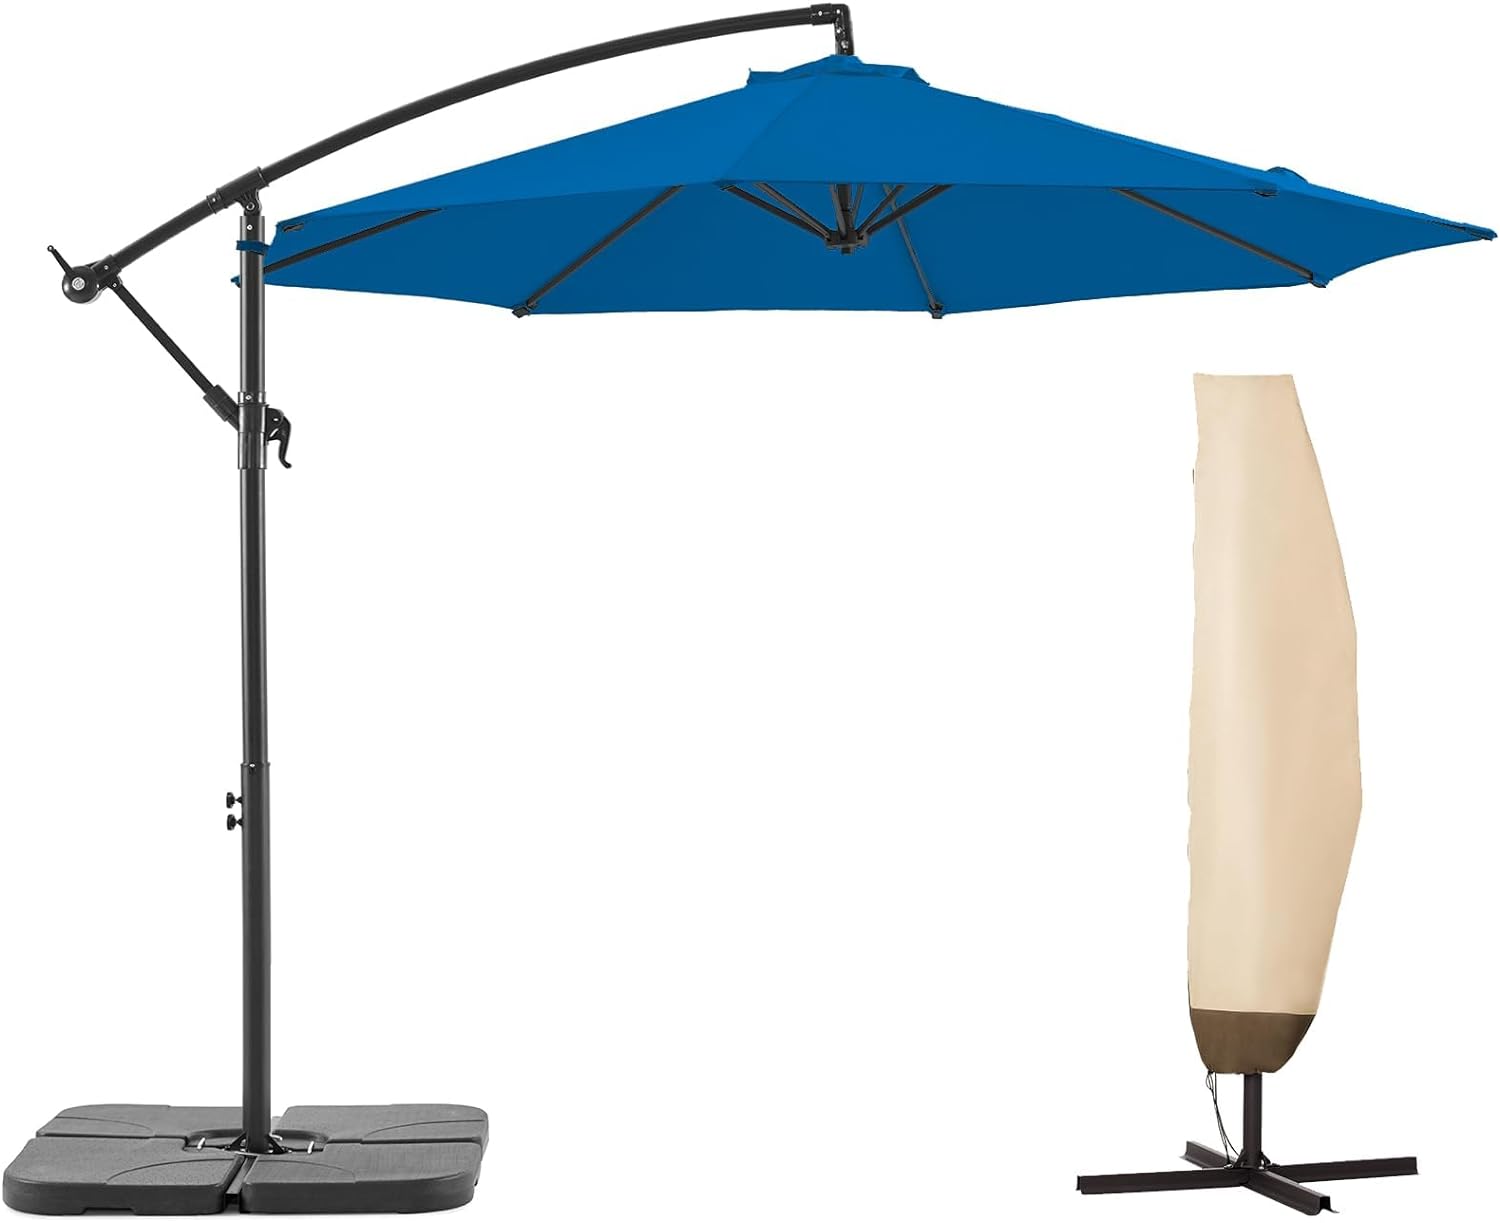 BLUU BANYAN 10 FT Patio Offset Umbrella Cantilever Hanging Umbrellas, 24 Month Fade Resistance & Water-repellent UV Protection, Crank & Cross Base (Royal Blue, 10 FT WITH 600D COVER)